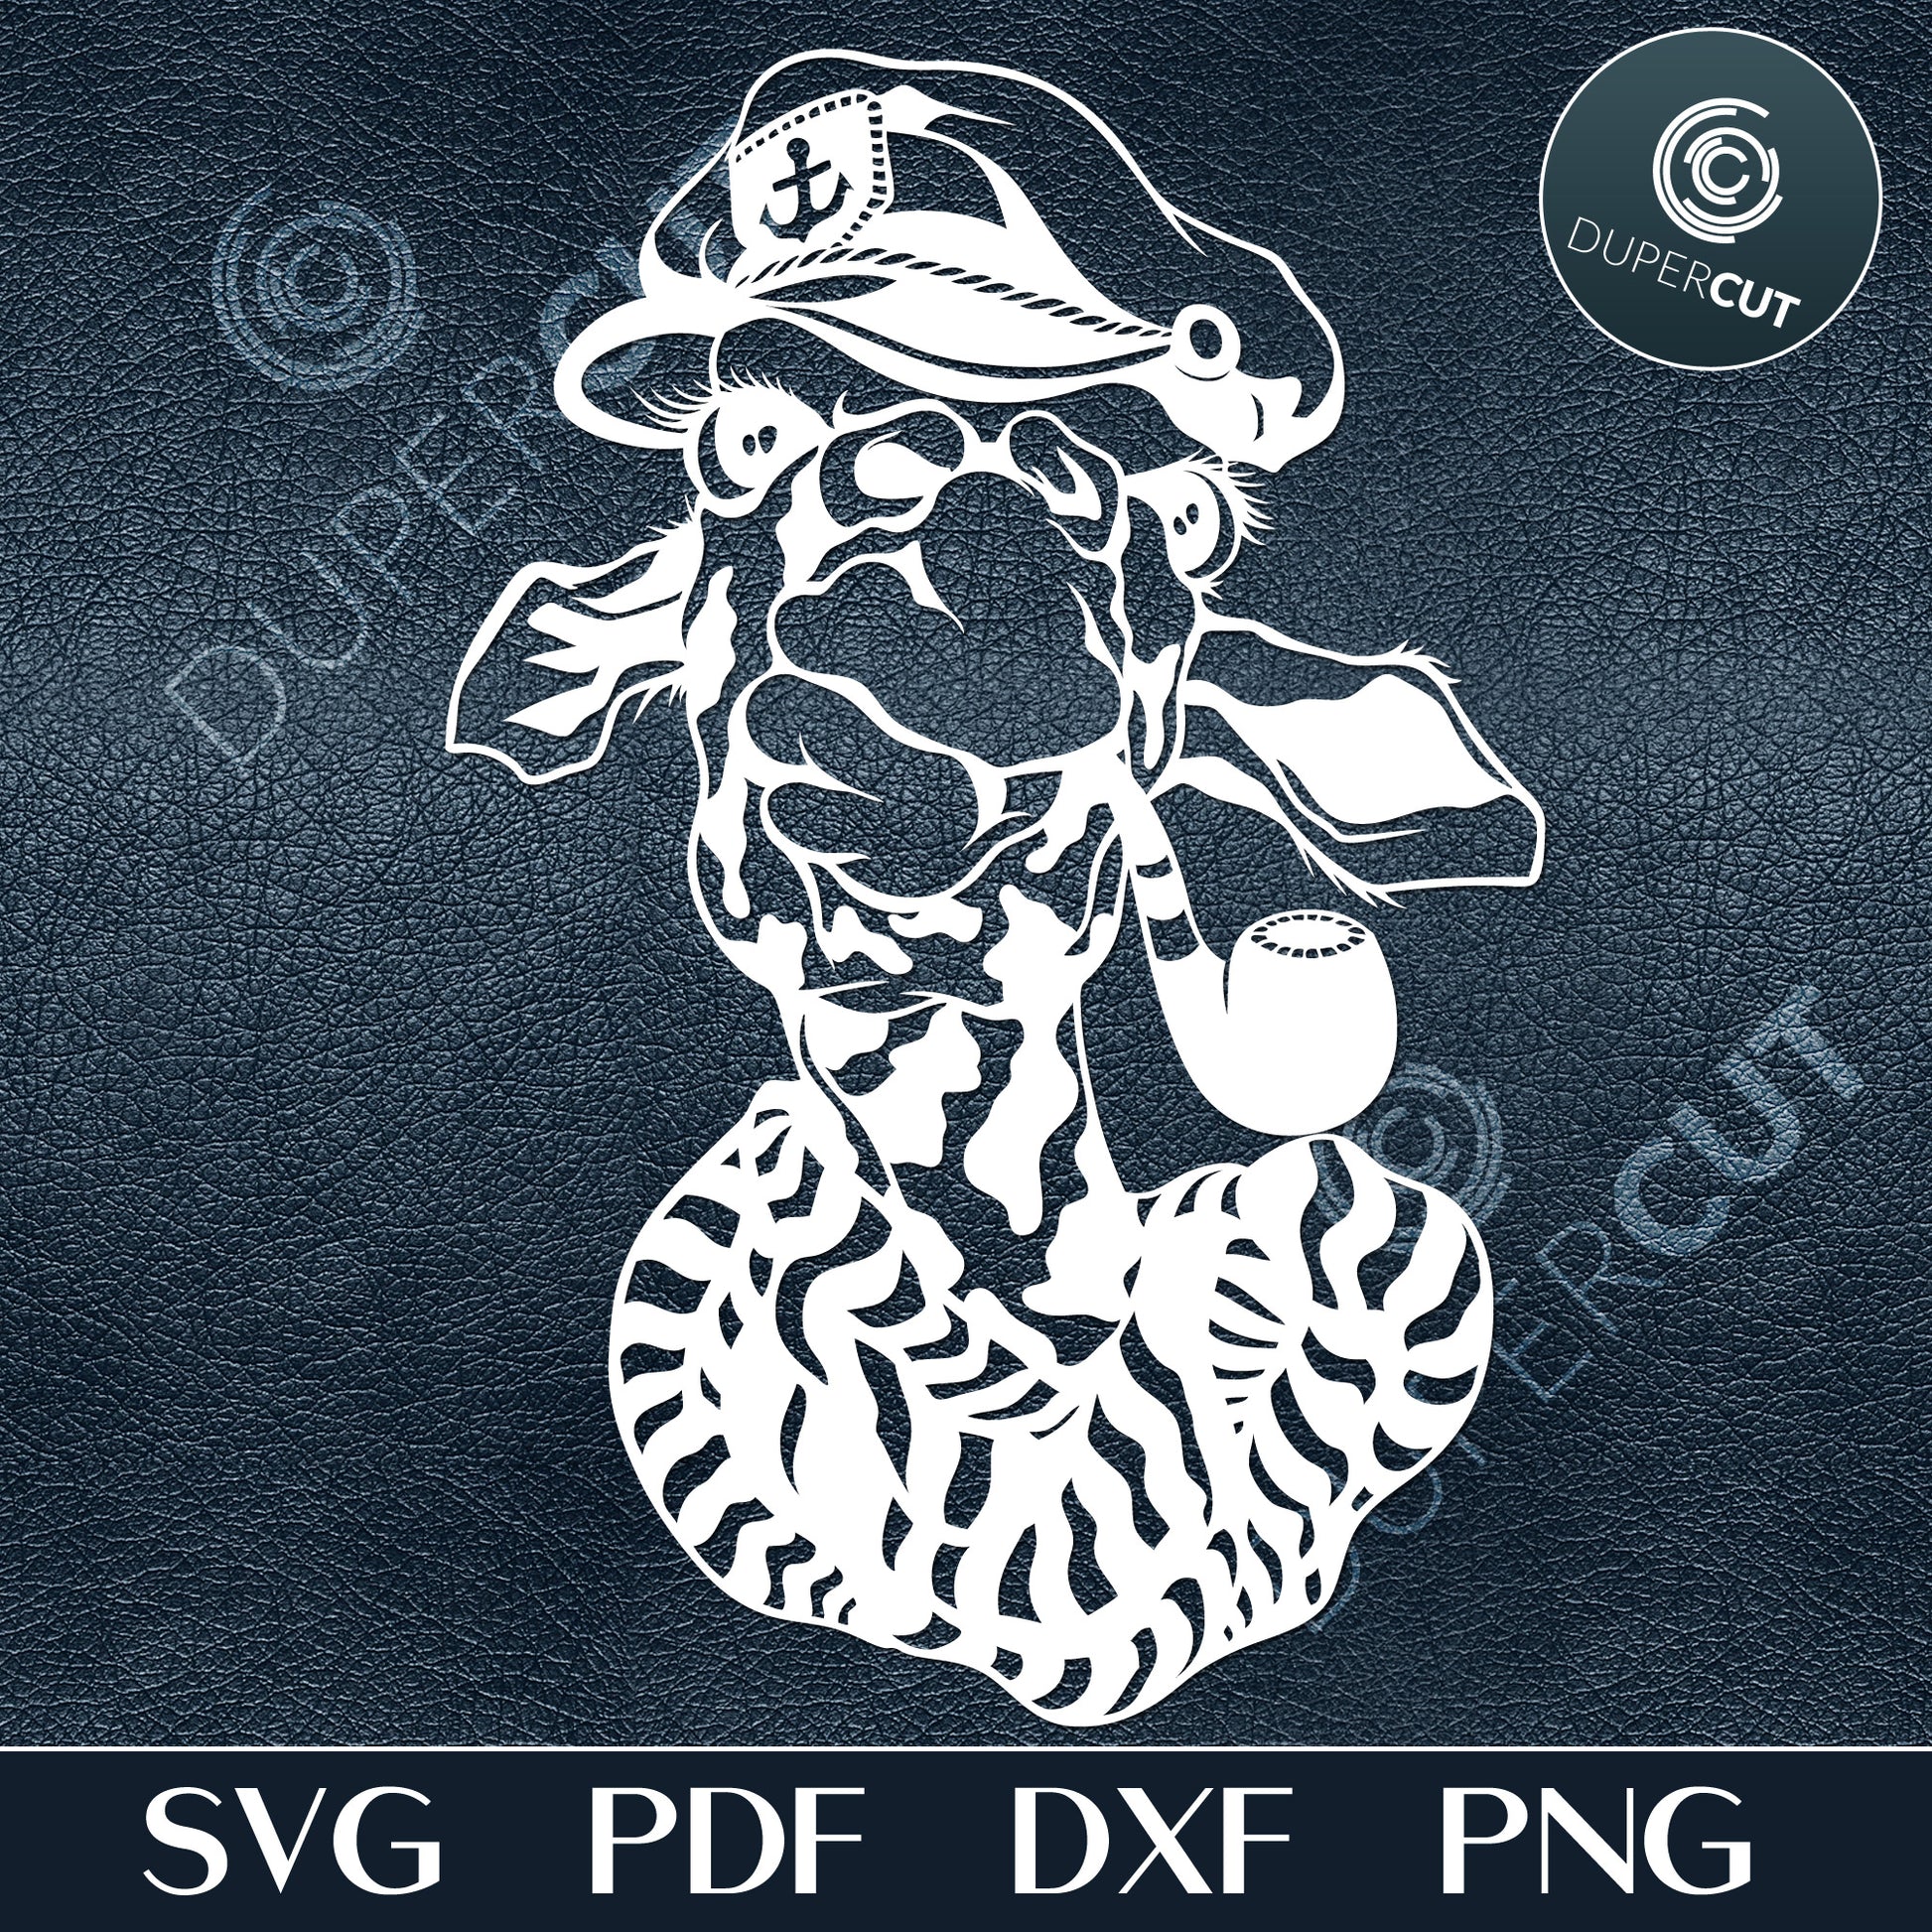 Cute funny giraffe. SVG PNG DXF cutting files for Cricut, Silhouette, Glowforge, print on demand, sublimation templates